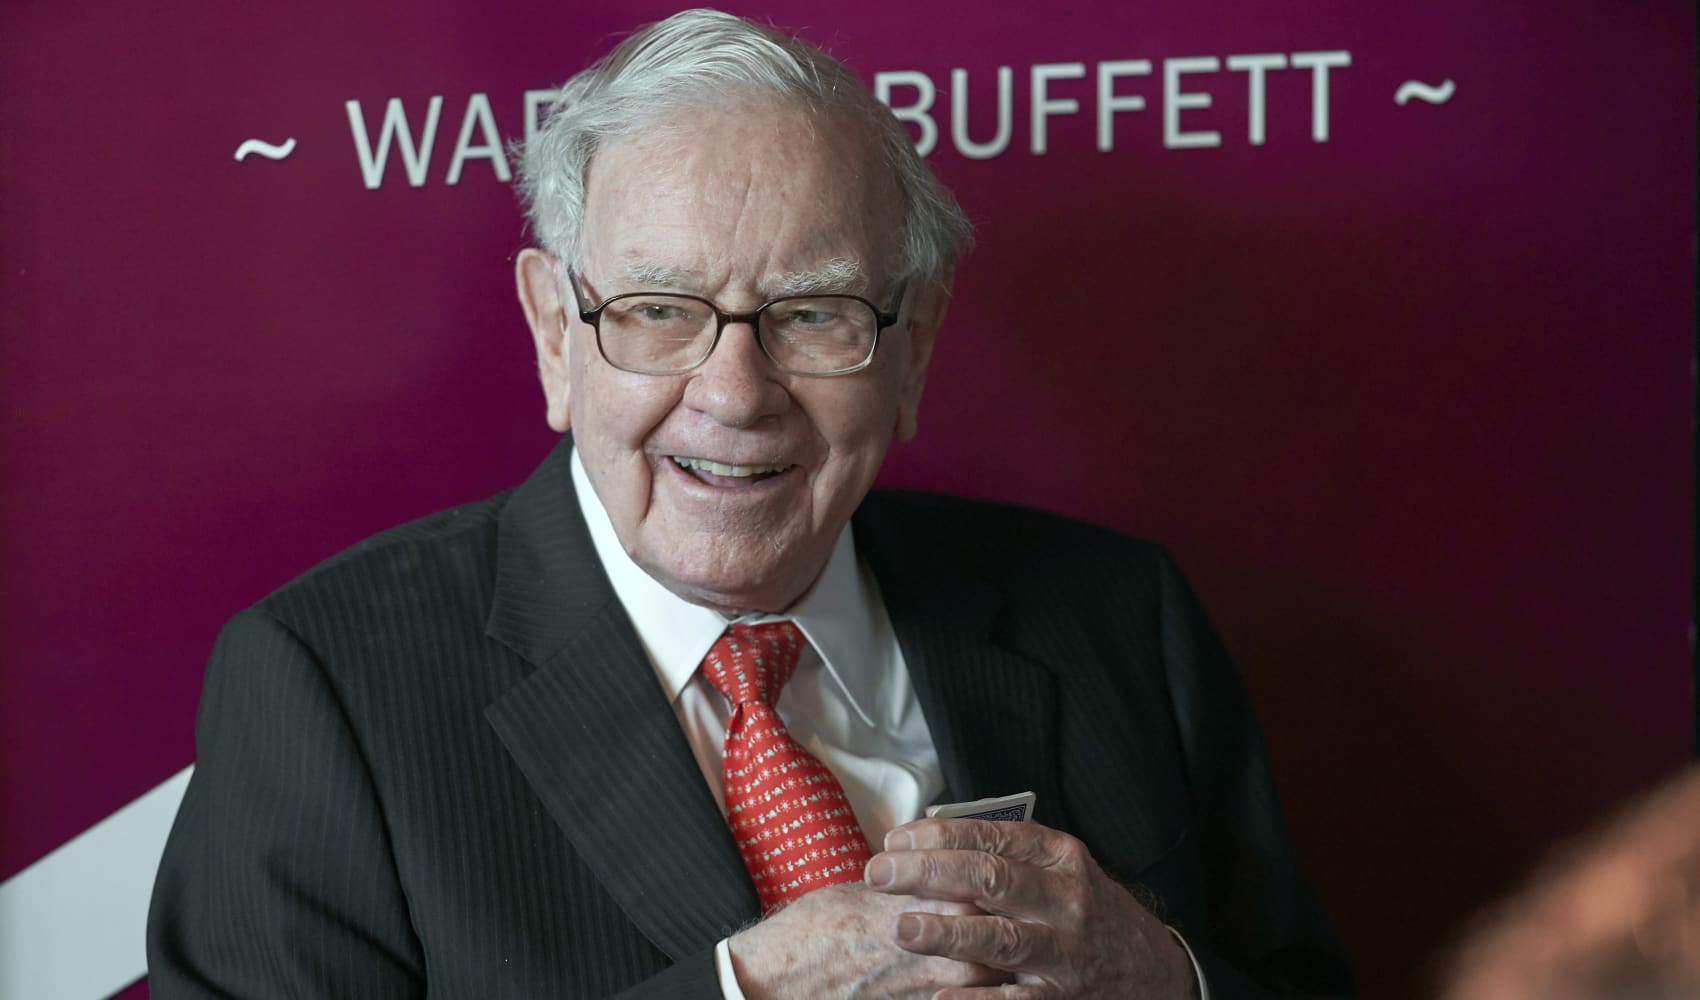 Most of Warren Buffett's wealth was accumulated after age 65. Here's what that can teach individual investors